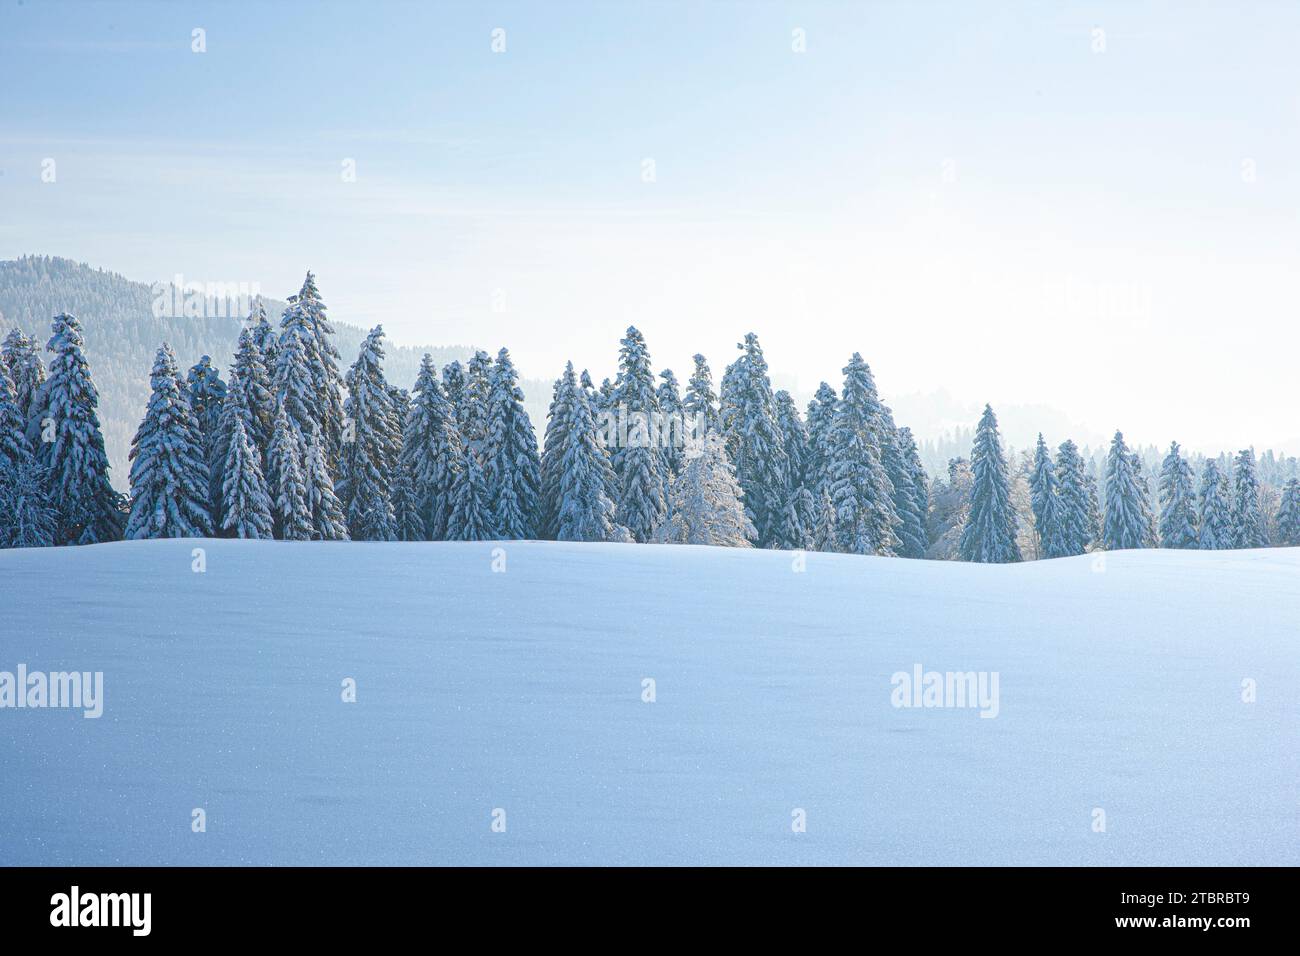 Winter landscape with snowfield in the foreground, fir forest in the background Stock Photo